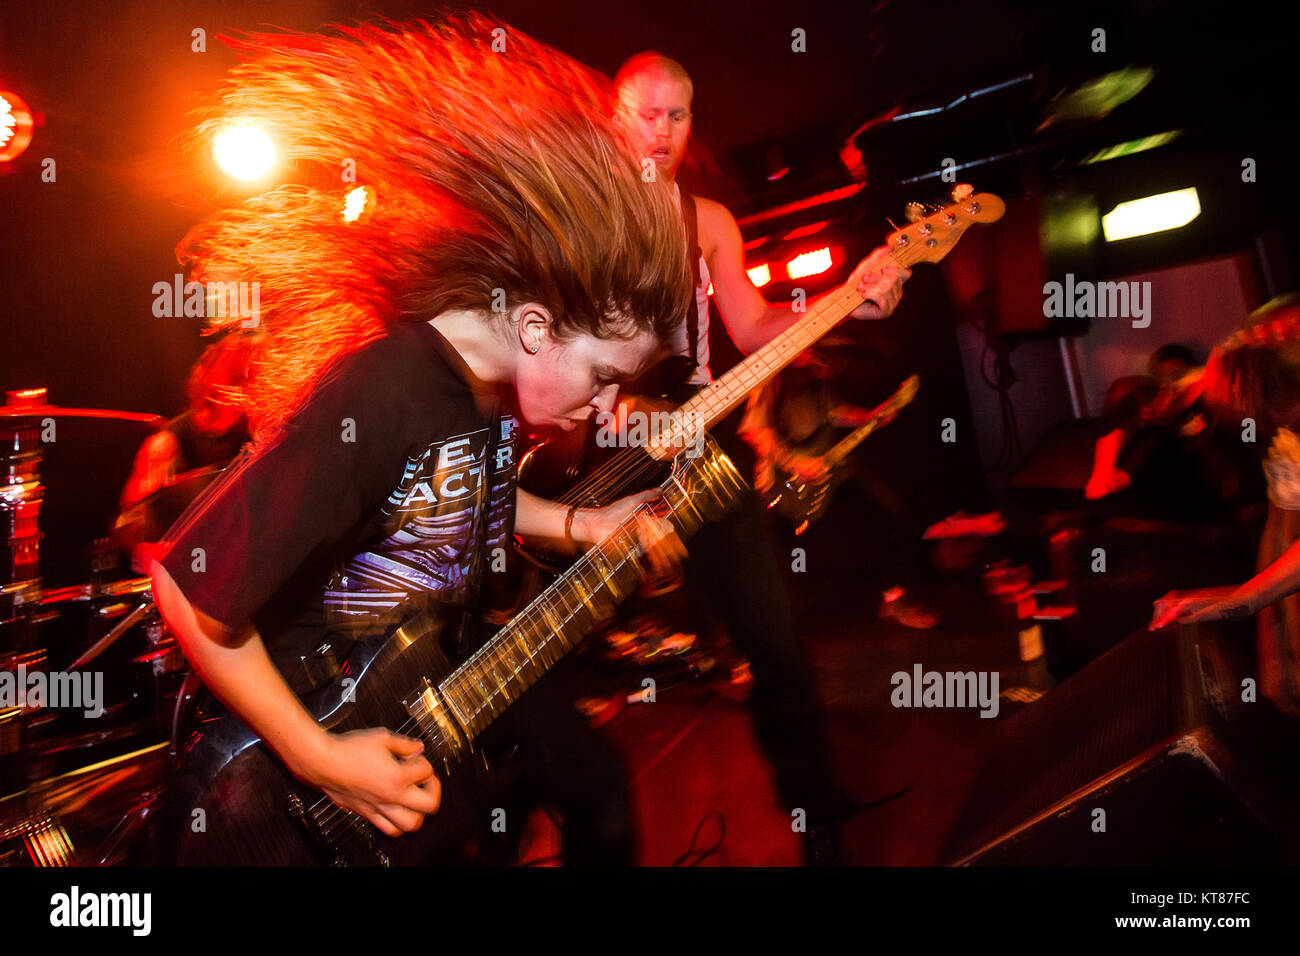 The American Metalcore Band Code Orange Performs A Live Concert At